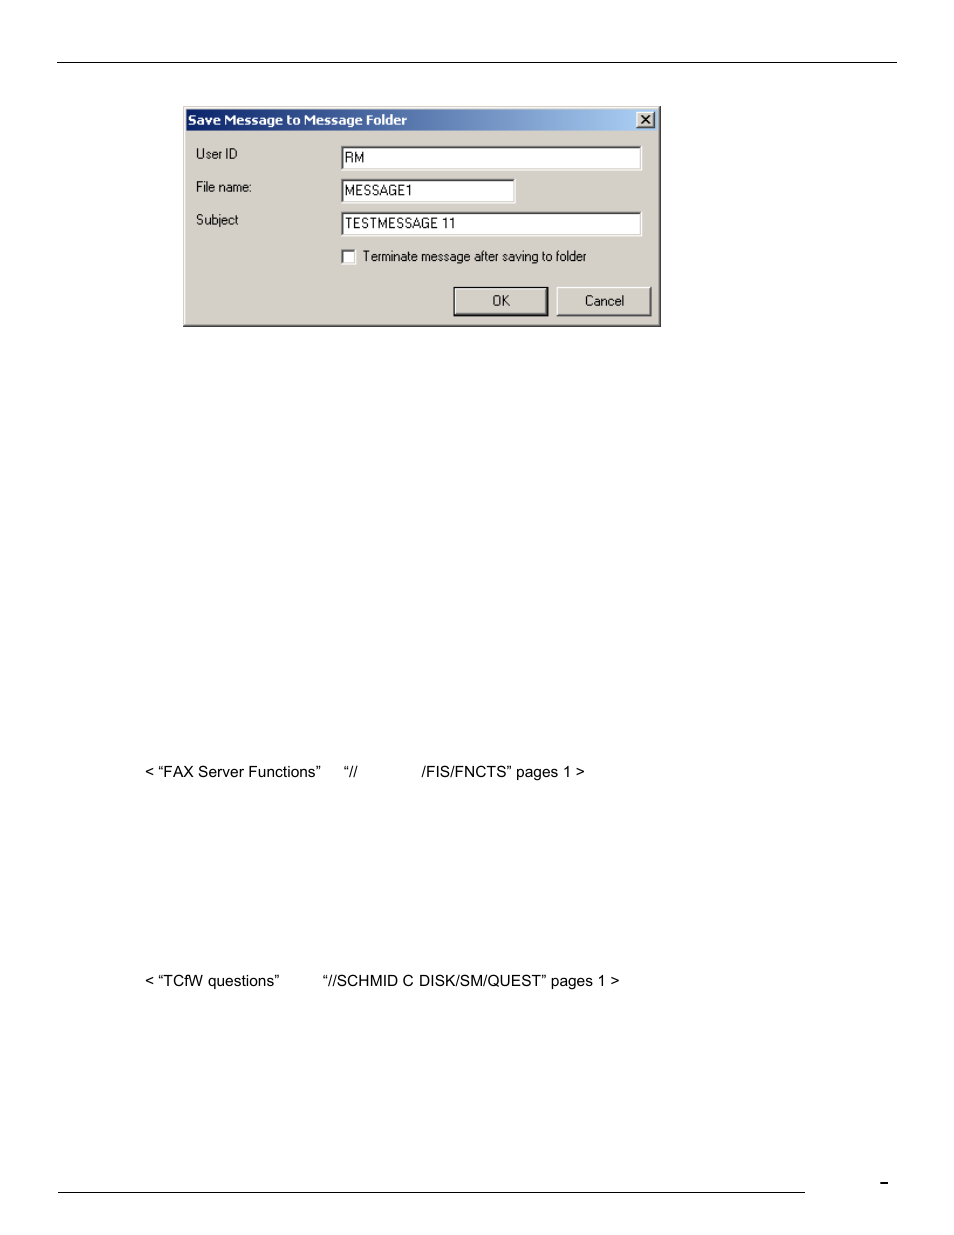 2 message to message | Kofax Communication Server 9.1.1 User Manual | Page 59 / 114